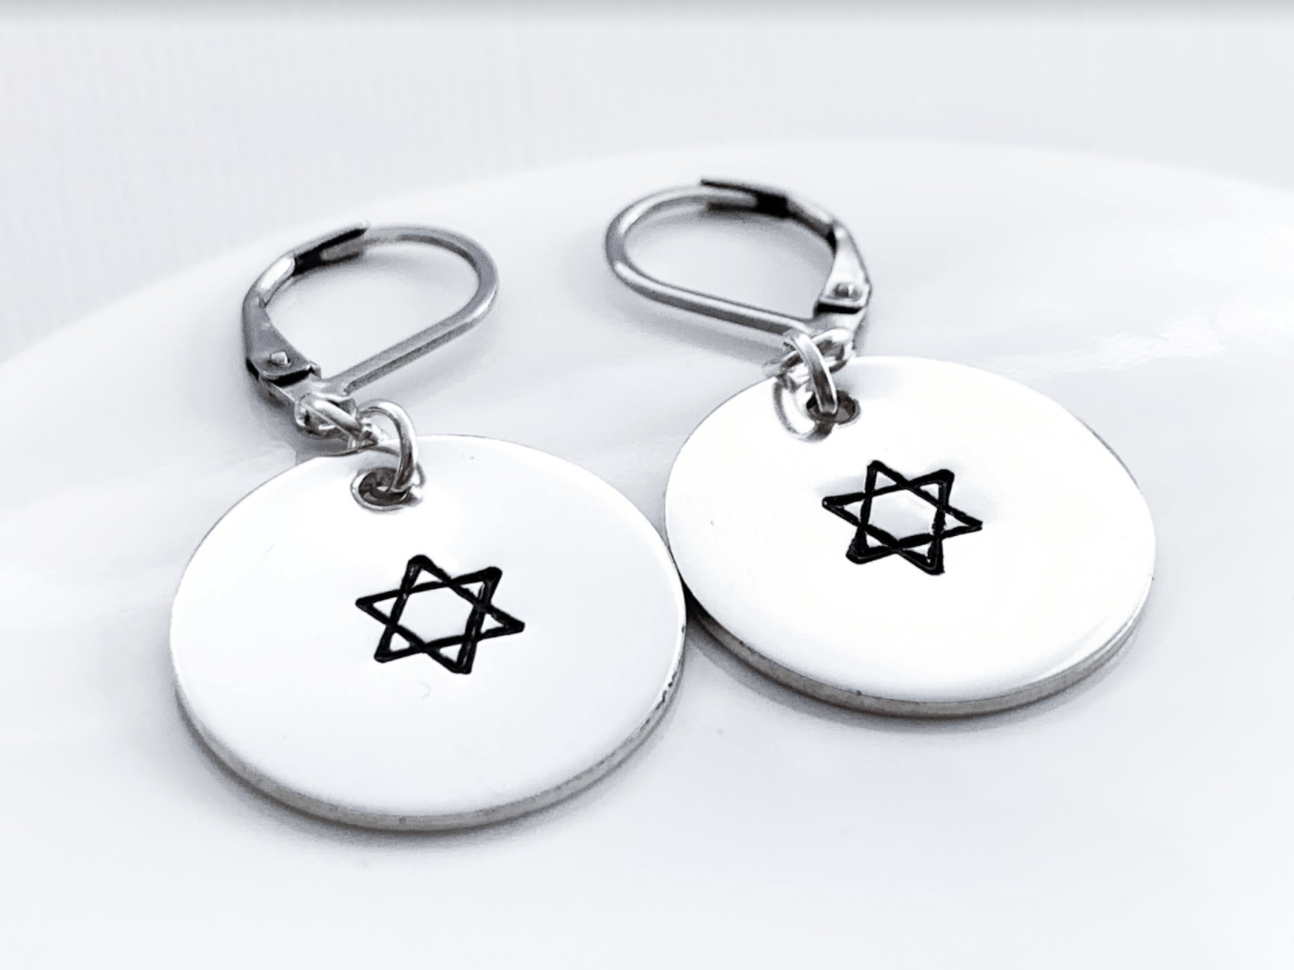 Everything Beautiful Earrings Sterling Silver Star of David Earrings - Sterling Silver